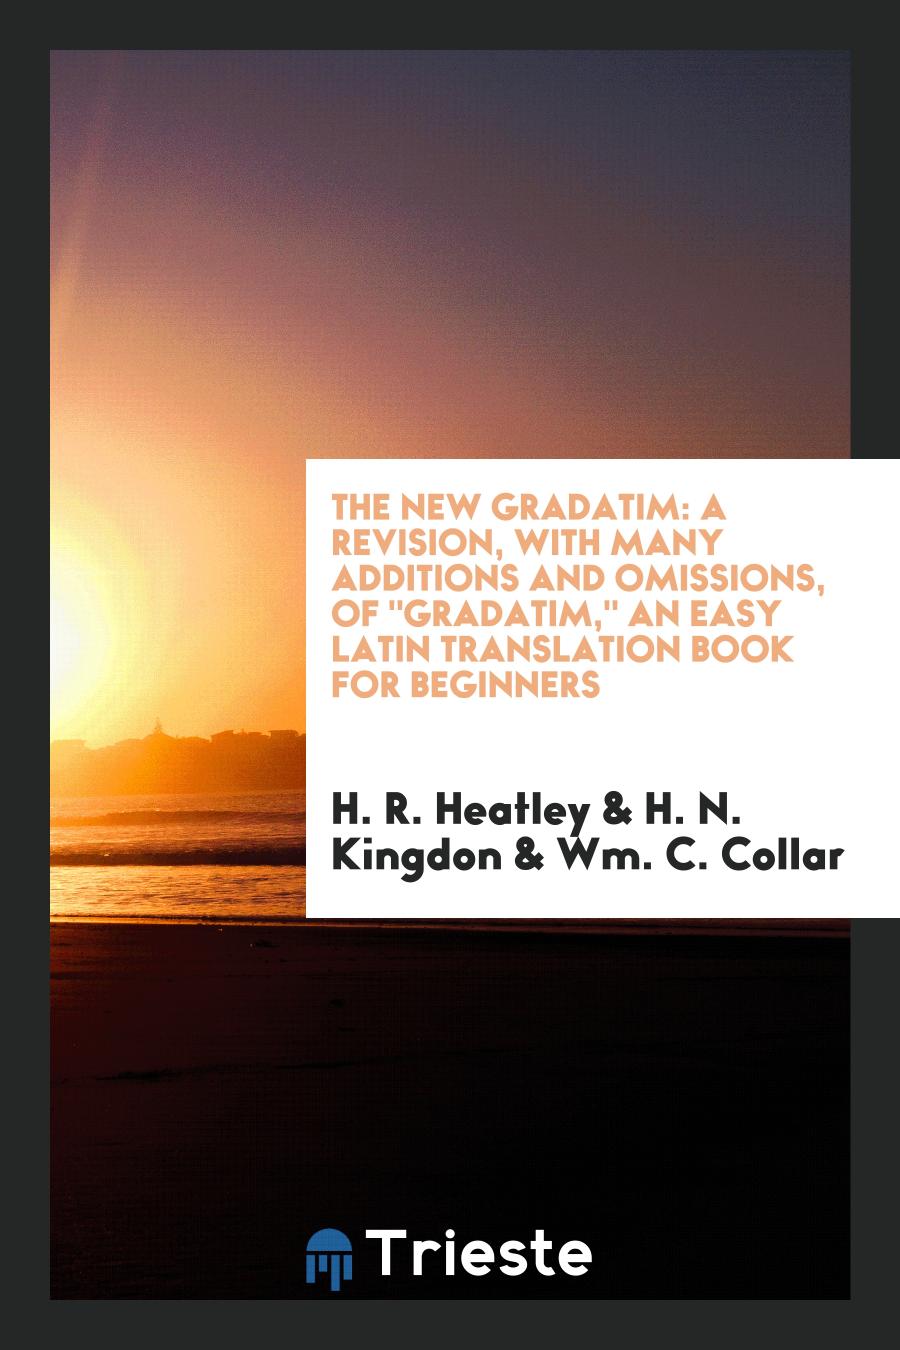 The New Gradatim: A Revision, with Many Additions and Omissions, Of "Gradatim," an Easy Latin Translation Book for Beginners